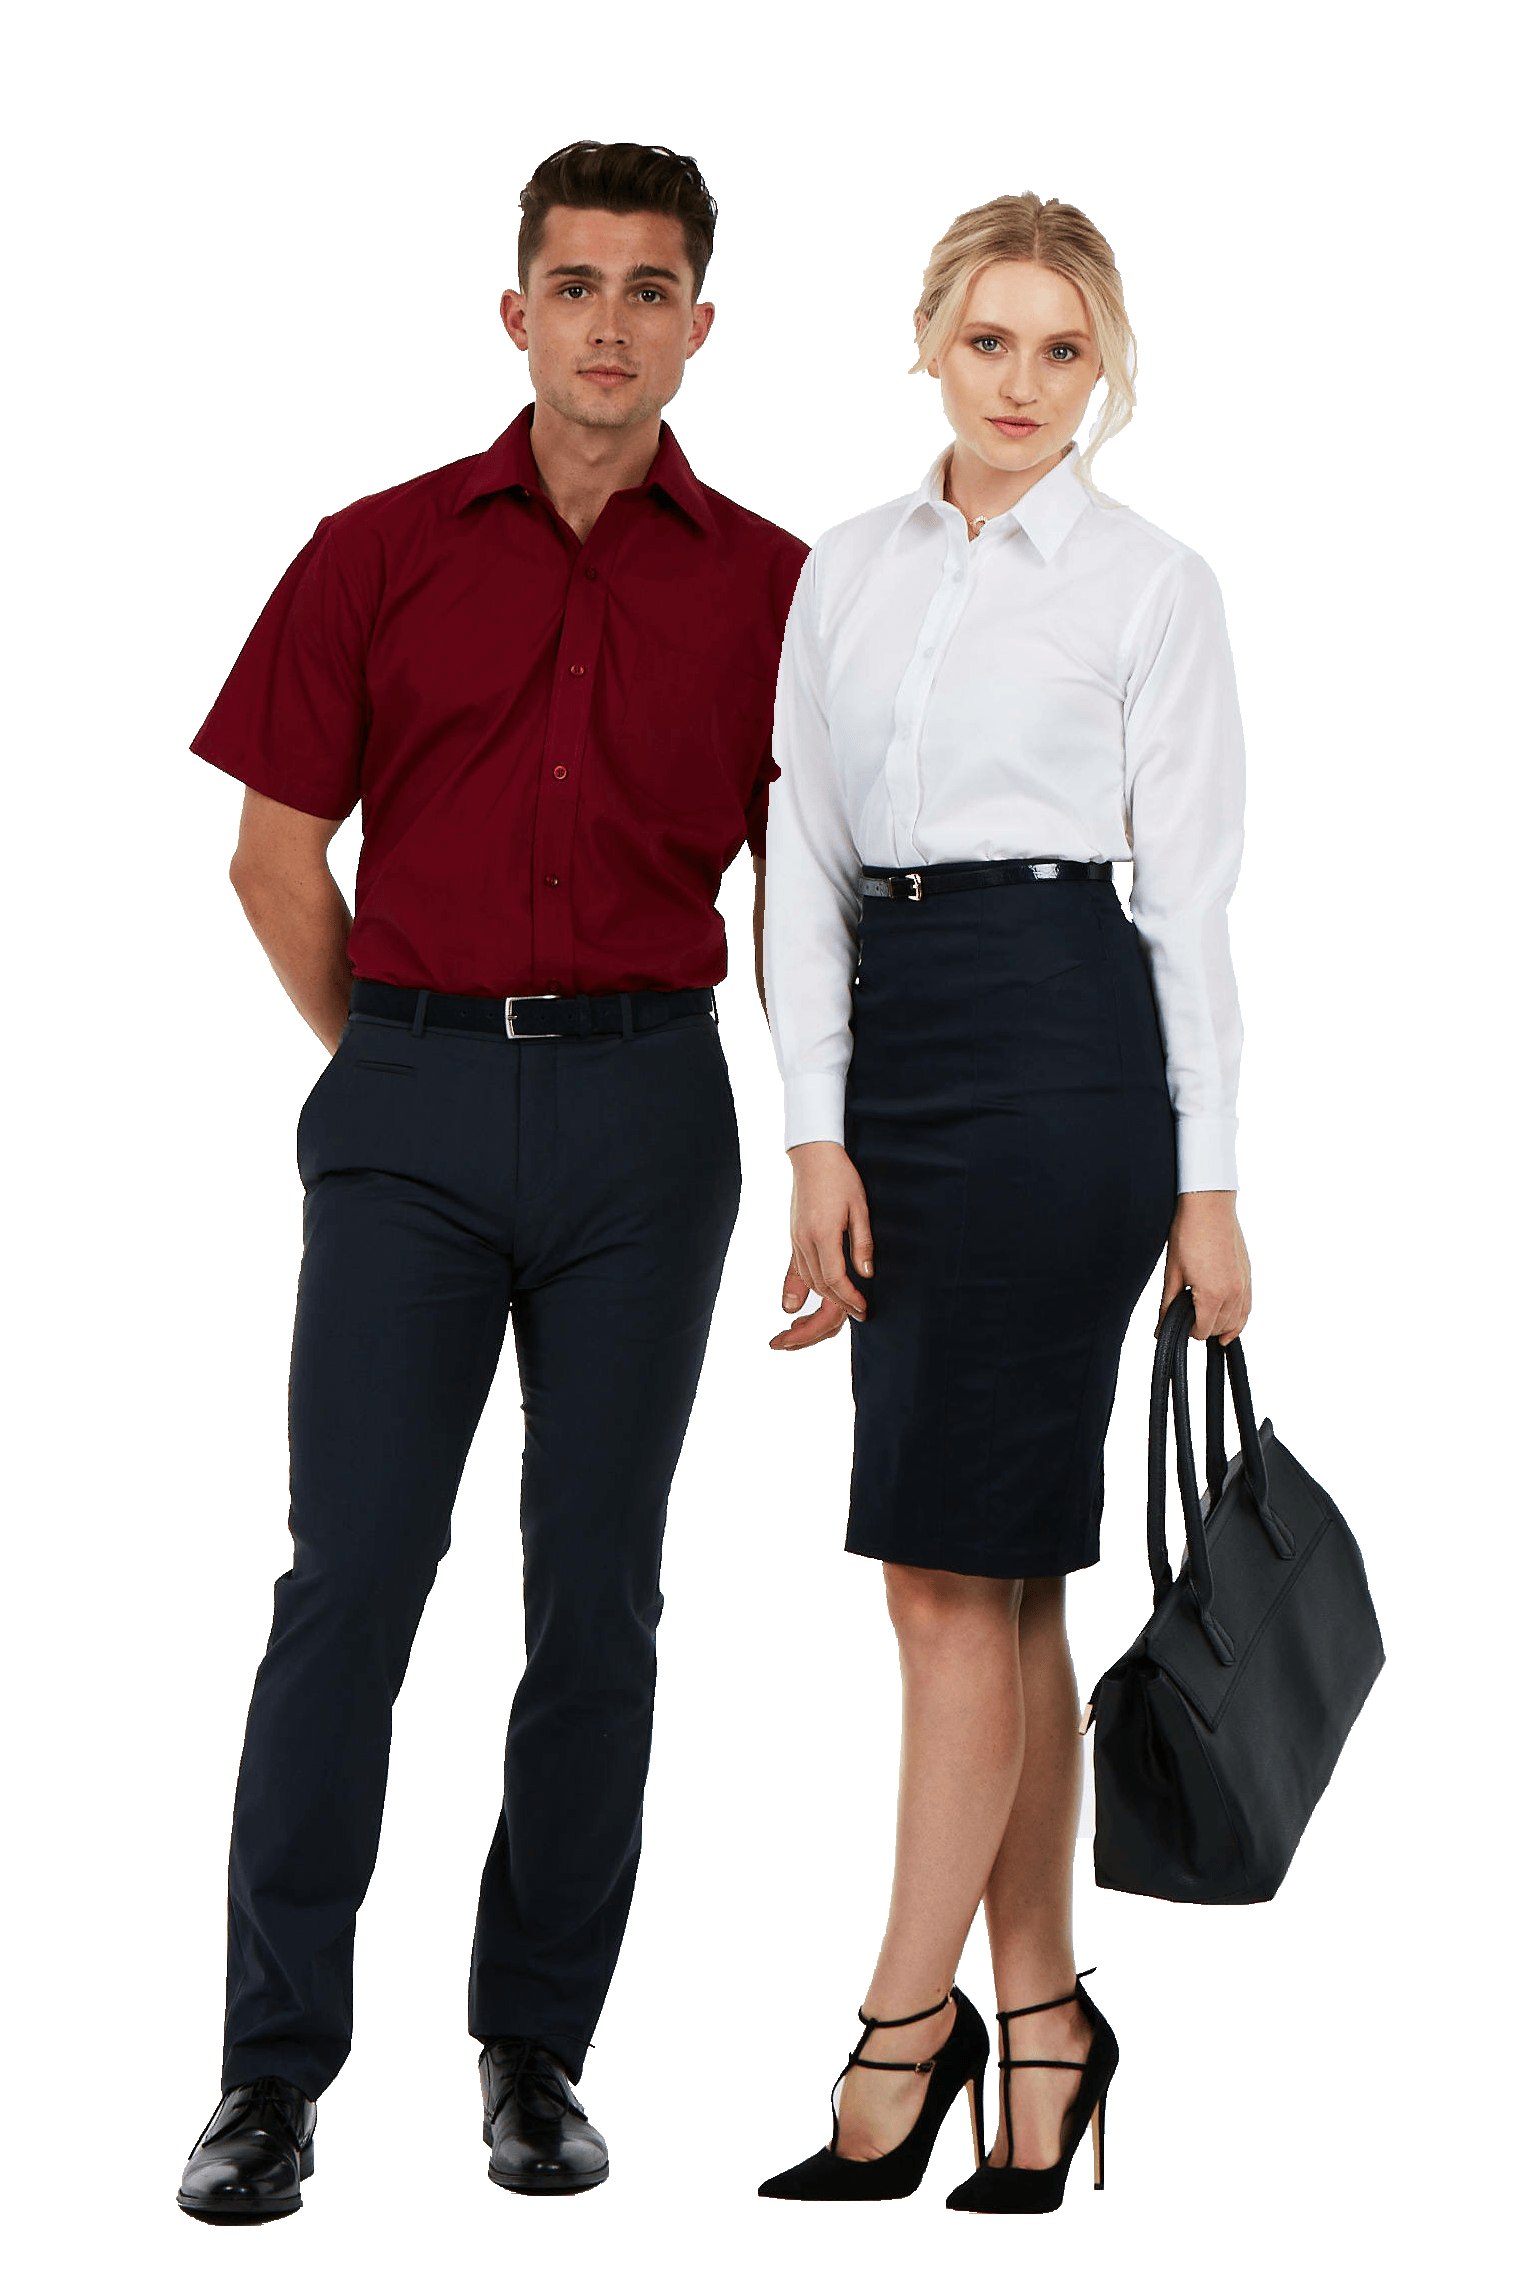 Young people wearing staff uniform and formal women's workwear